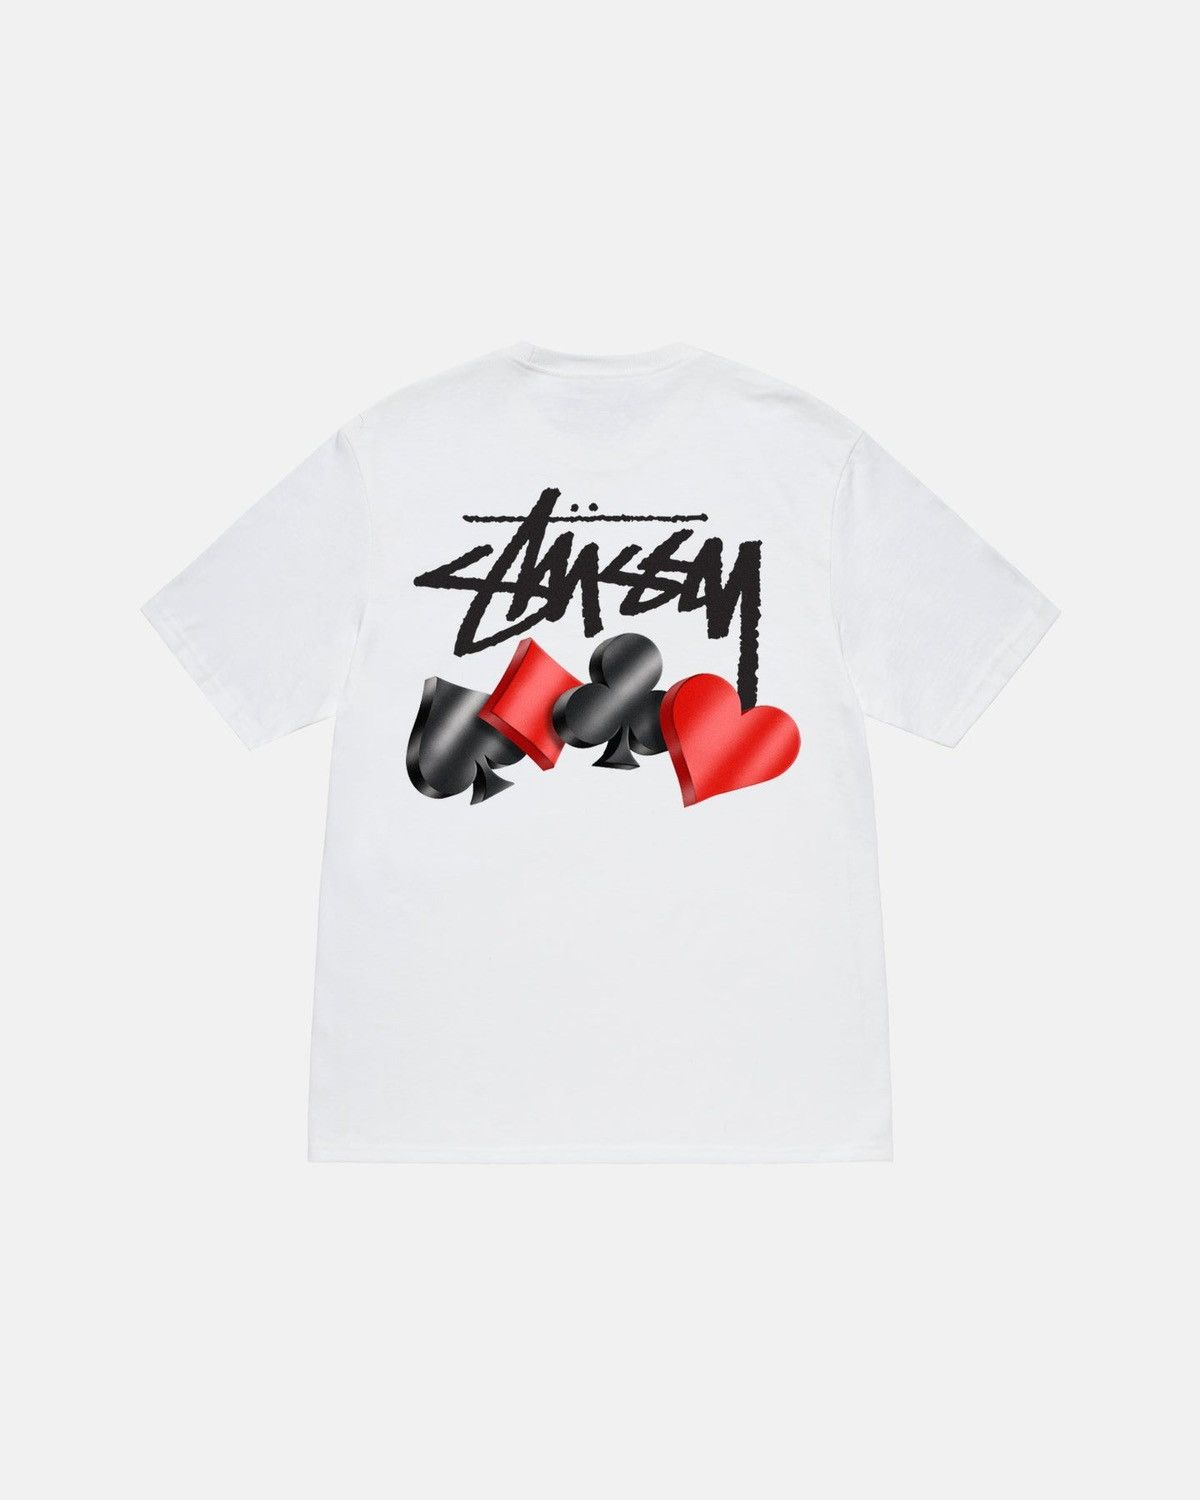 Stussy Stüssy Suits Tee Shirt White | Grailed